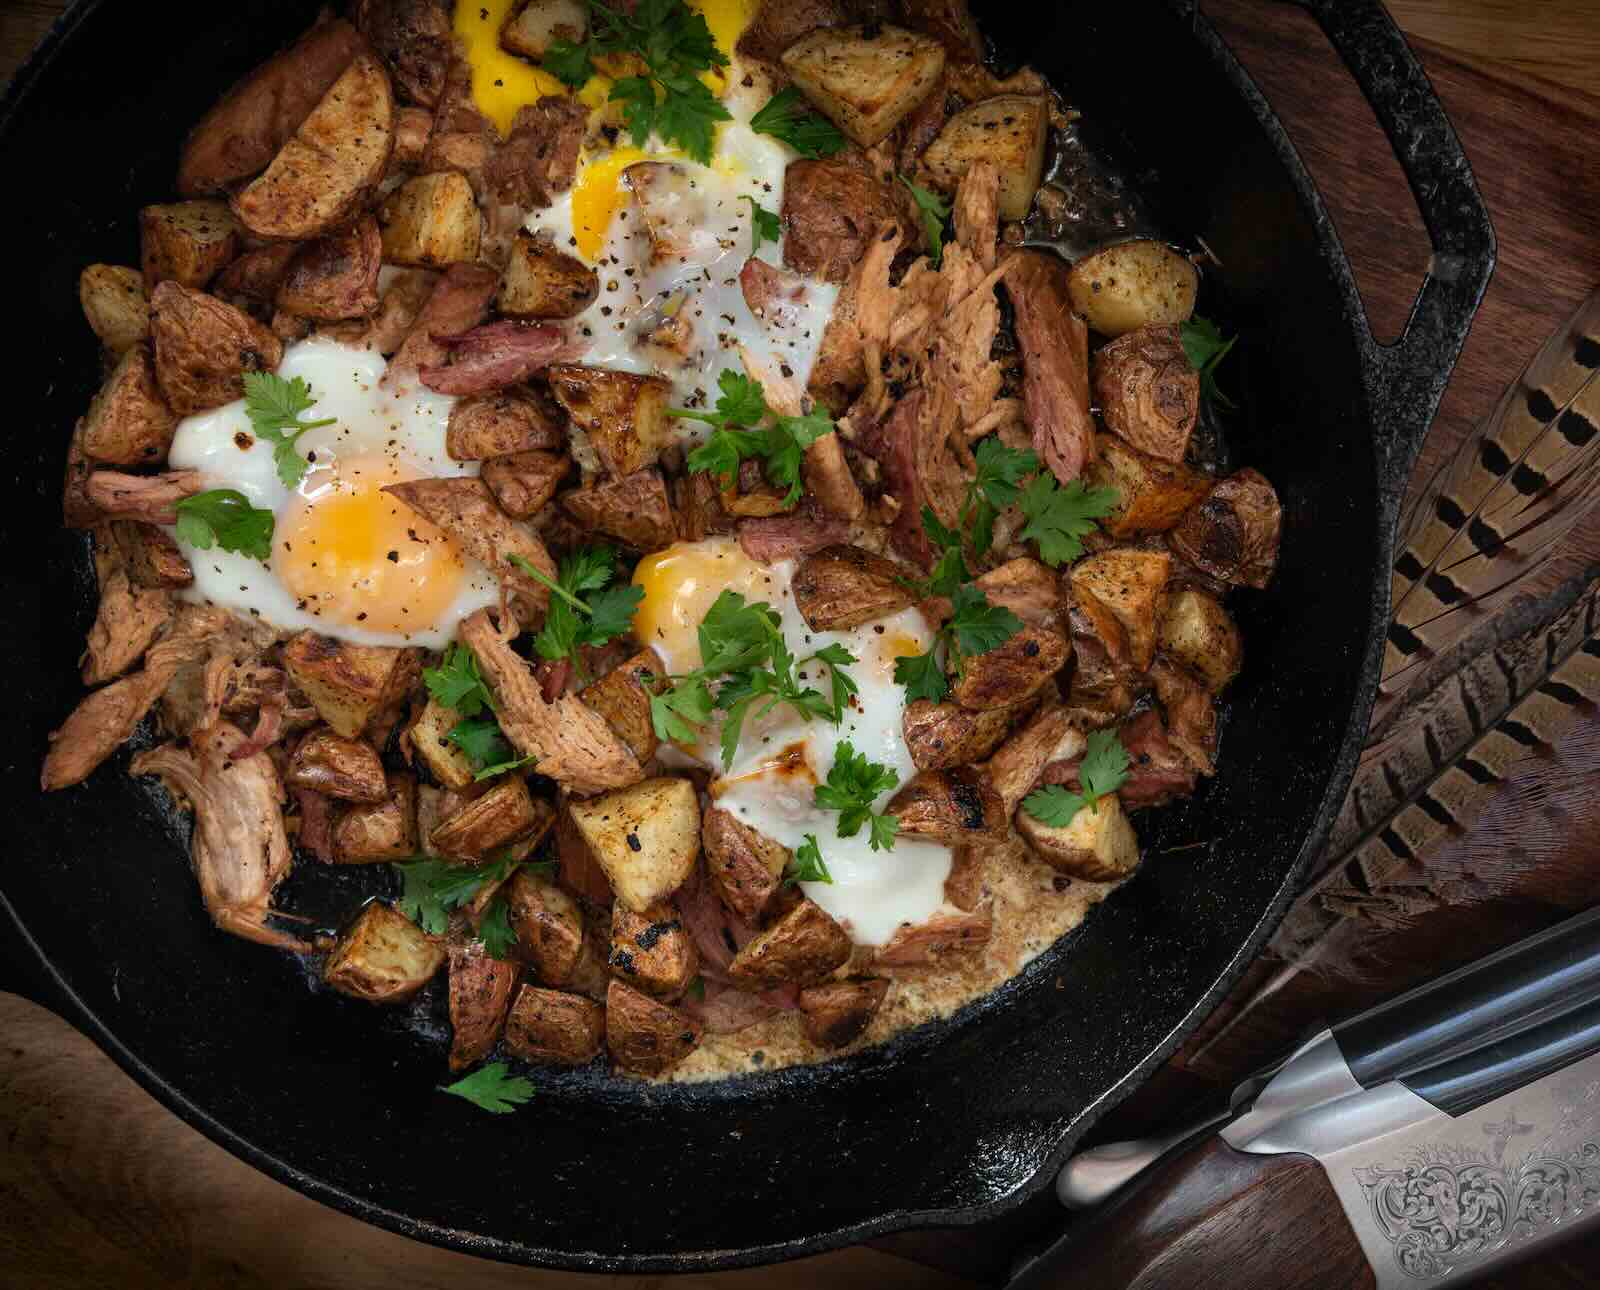 Corned pheasant hash with fried egg and red potatoes in a cast iron skillet with an accent of pheasant feathers